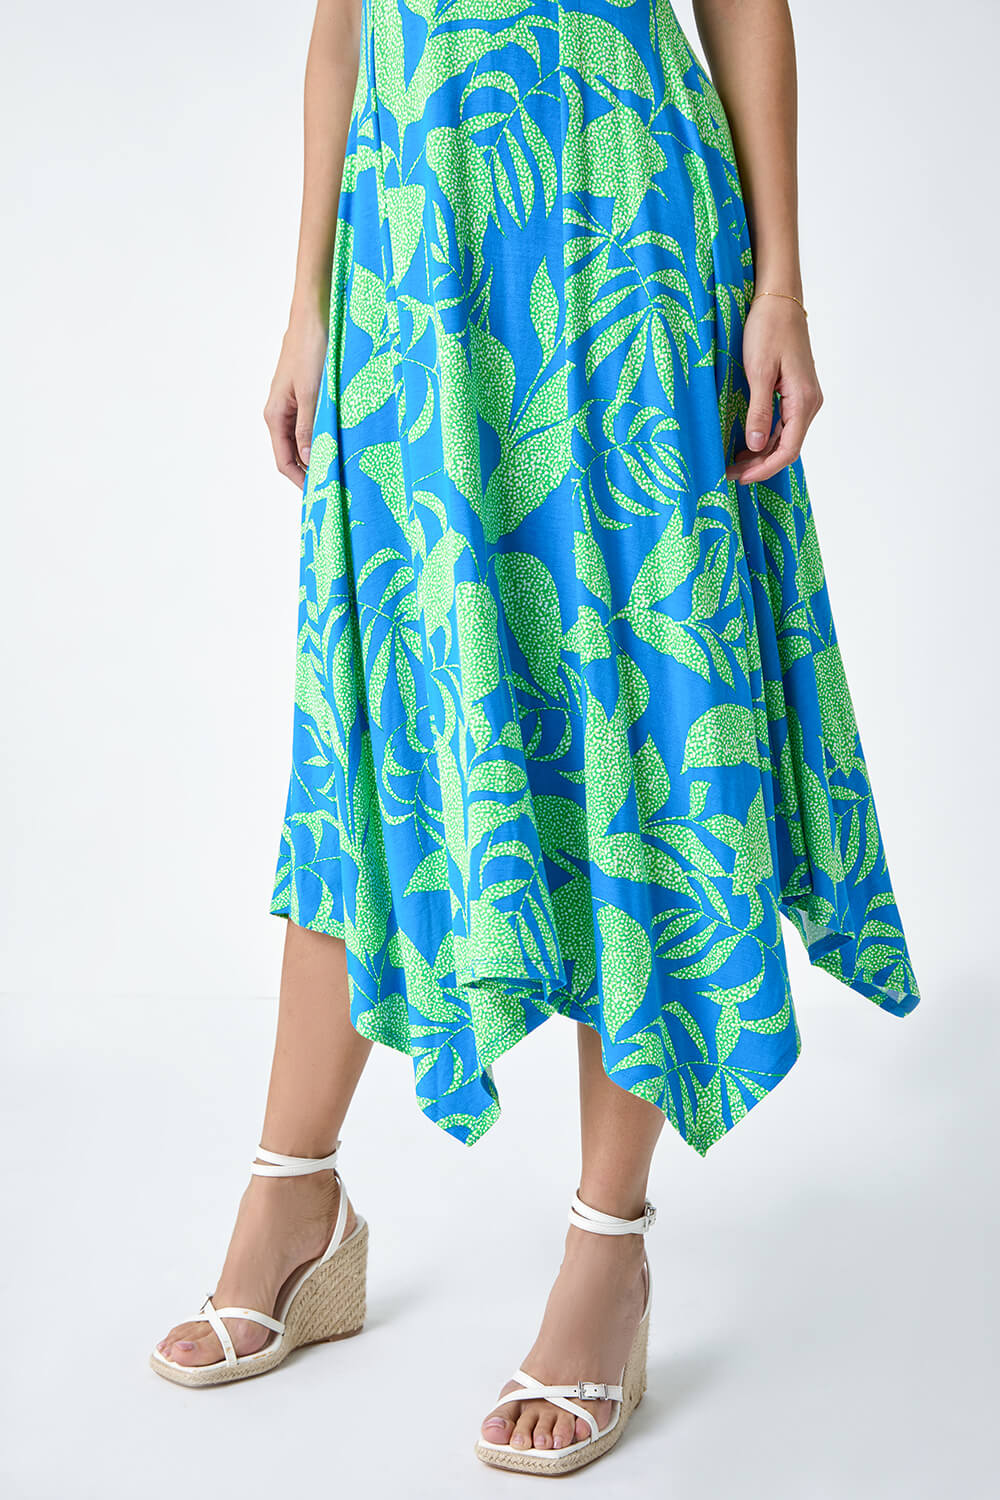 Turquoise Tropical Print Pleated Maxi Stretch Dress, Image 5 of 5